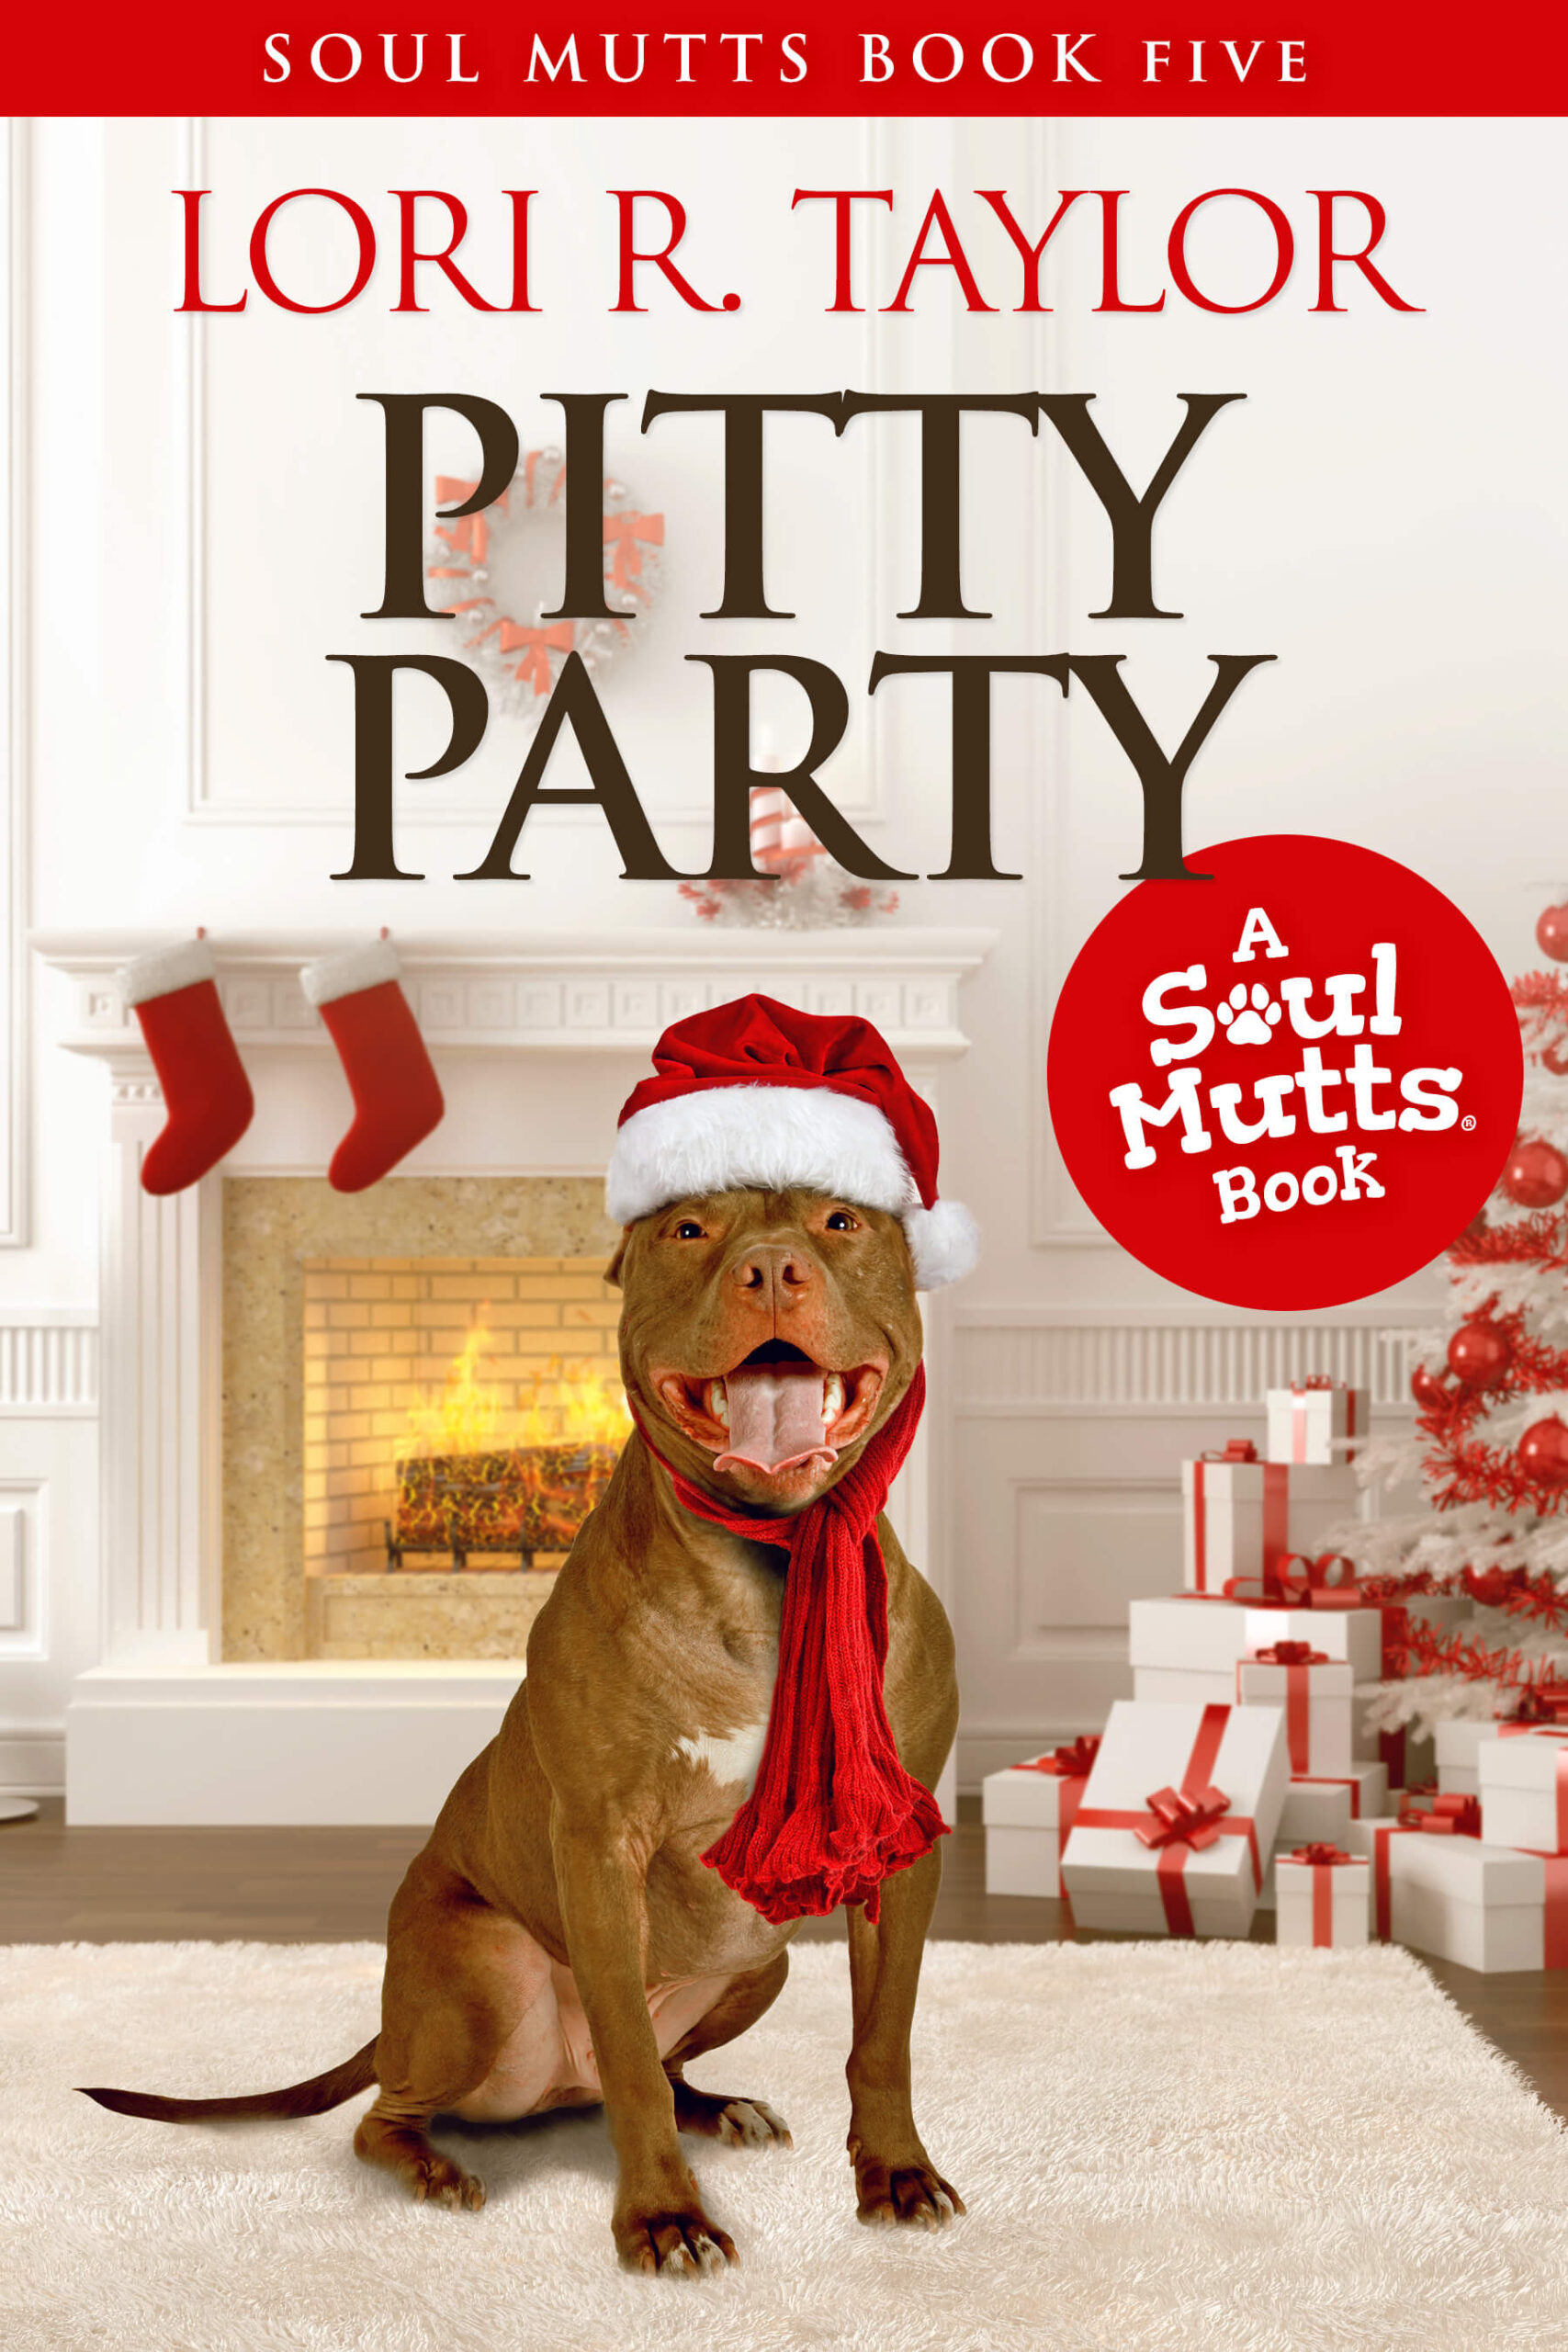 FREE: Pitty Party by Lori R. Taylor